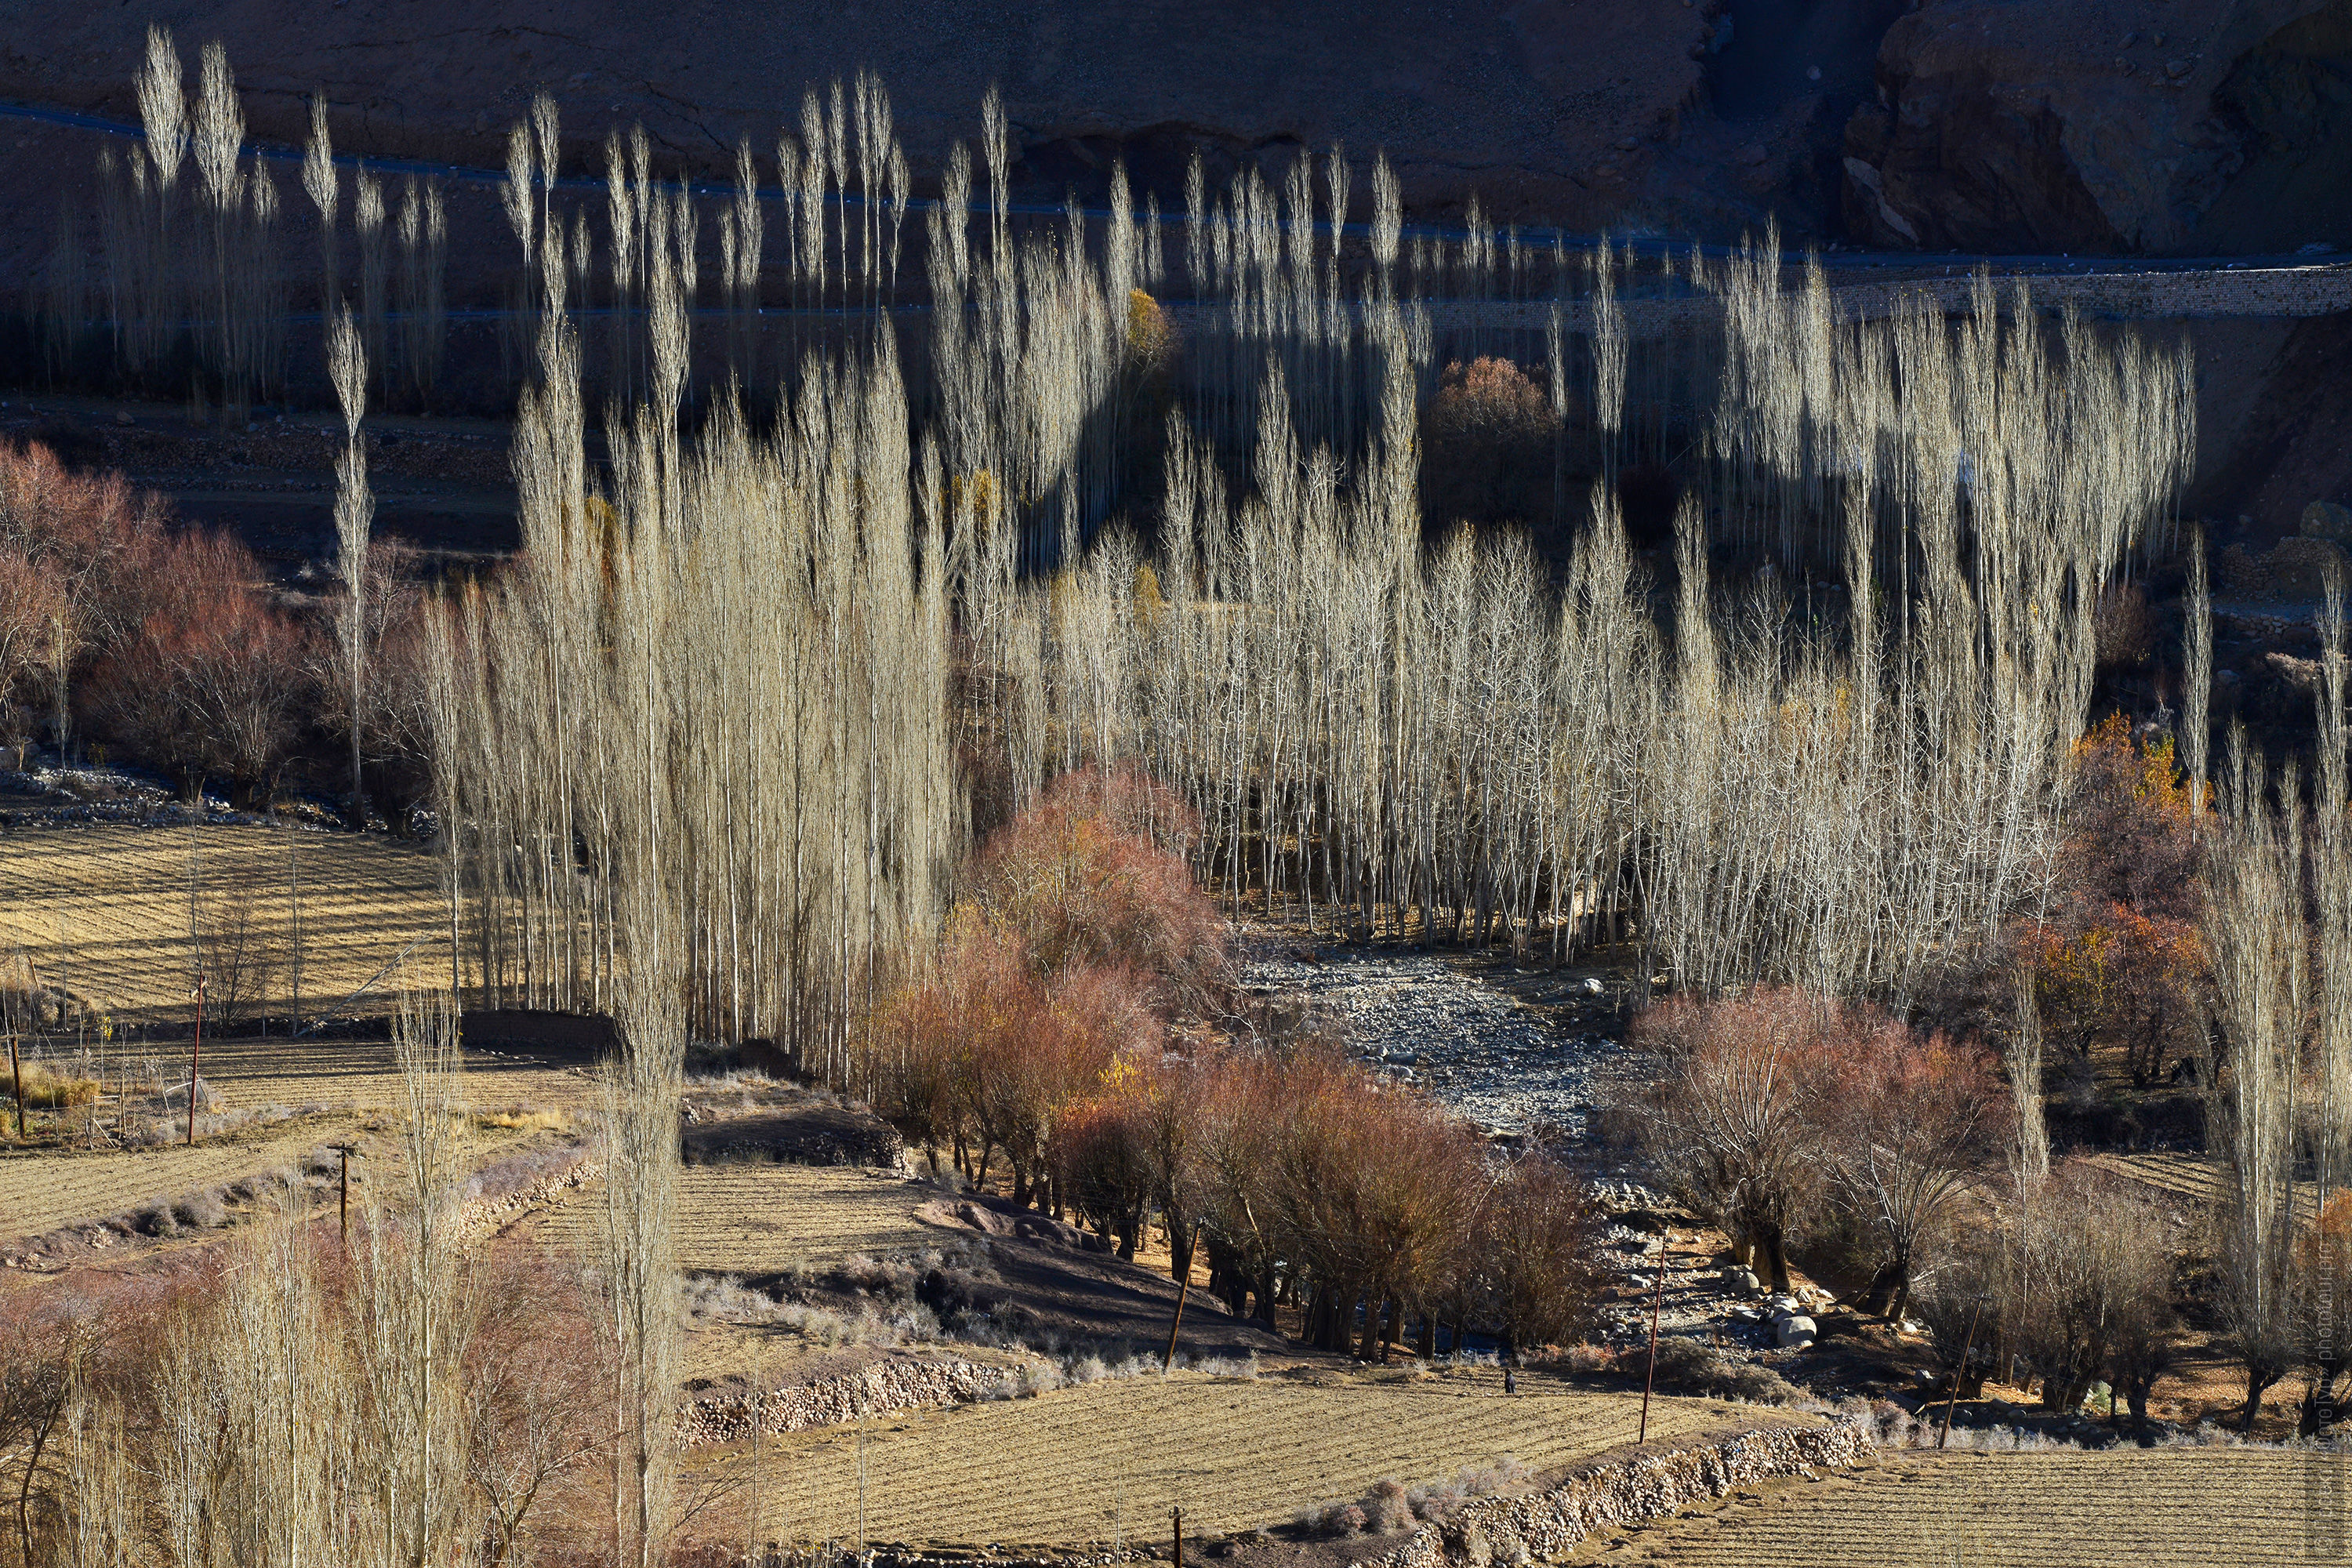 Winter landscapes of Ladakh. Photo tour to Tibet for the Winter Mysteries in Ladakh, Stok and Matho monasteries, 01.03. - 03/10/2020